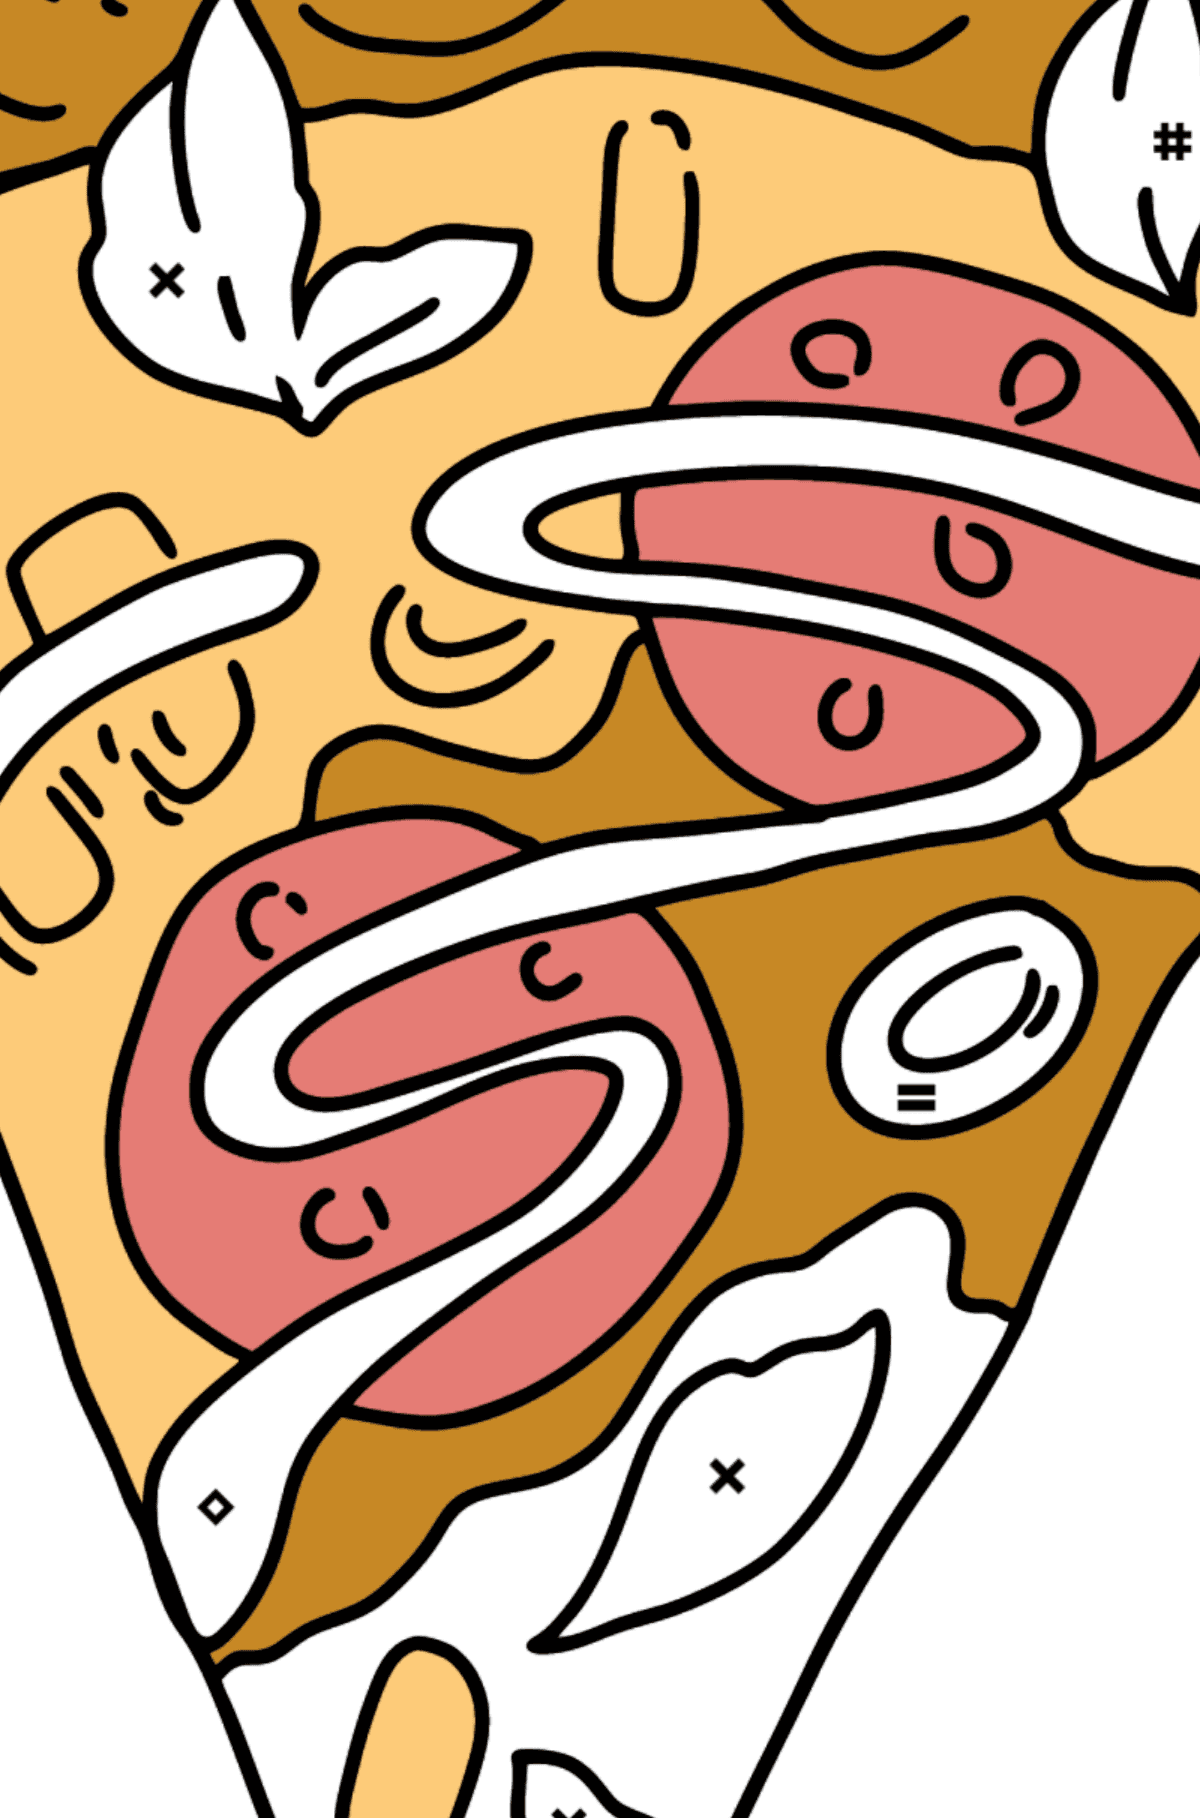 Salami Pizza coloring page - Coloring by Symbols for Kids